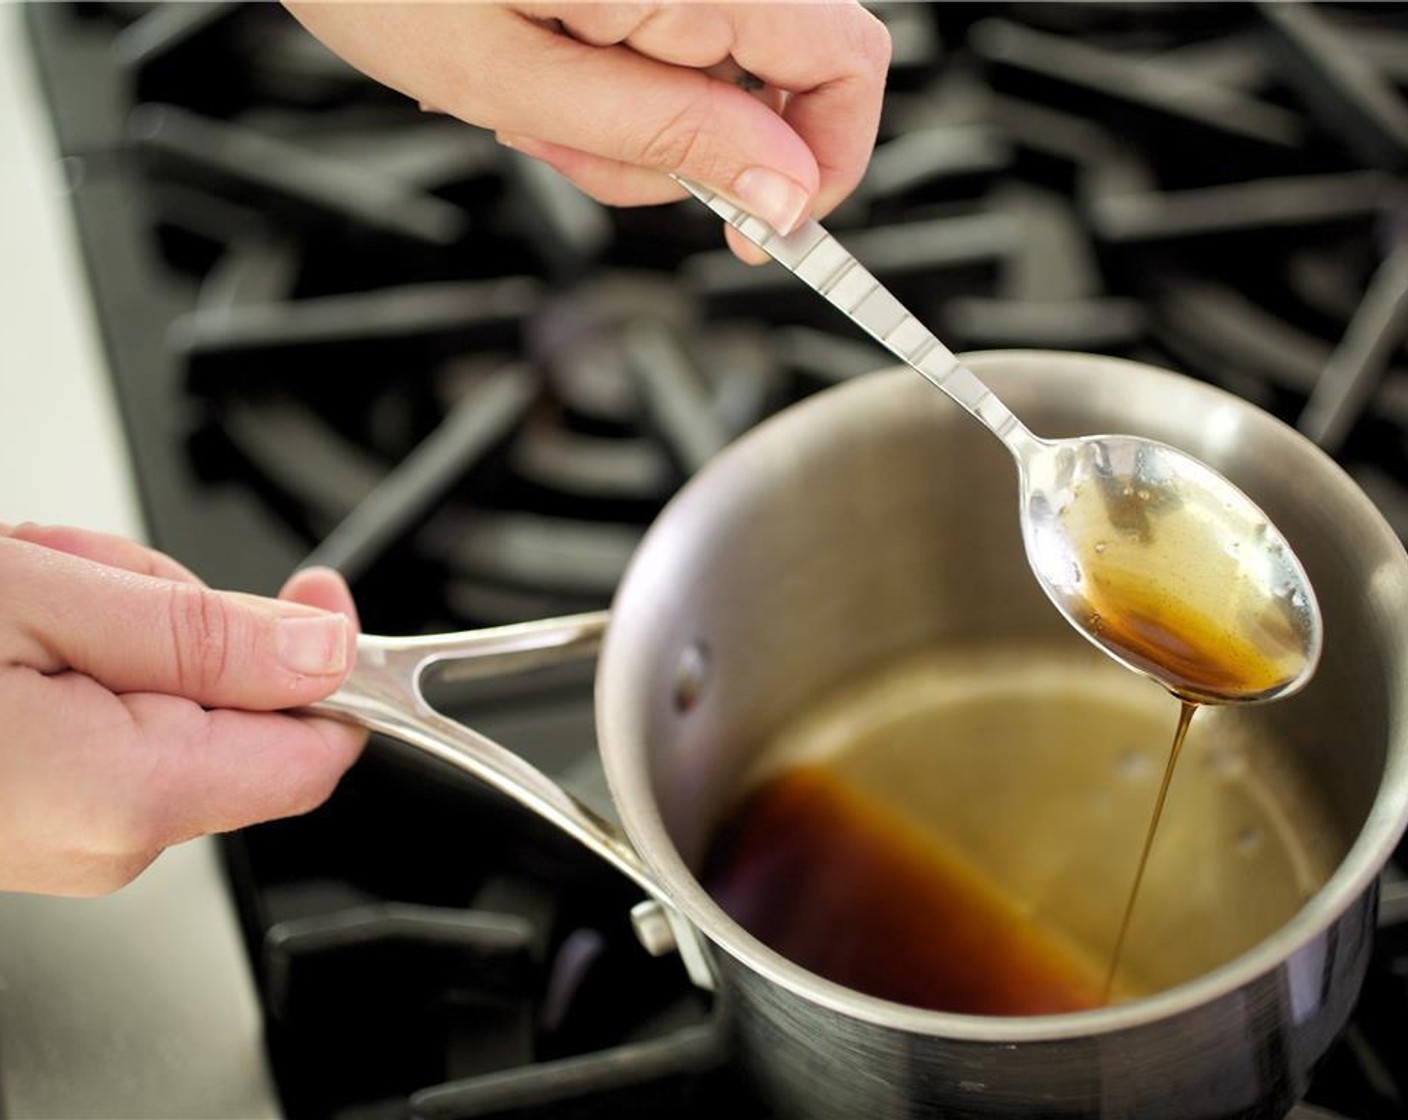 step 2 Bring the Apple Juice (2 cups) to a quick boil in a medium saucepan over medium high heat. Let simmer for 40 minutes or until it is reduced down to a syrup consistency, about a quarter of a cup of liquid.